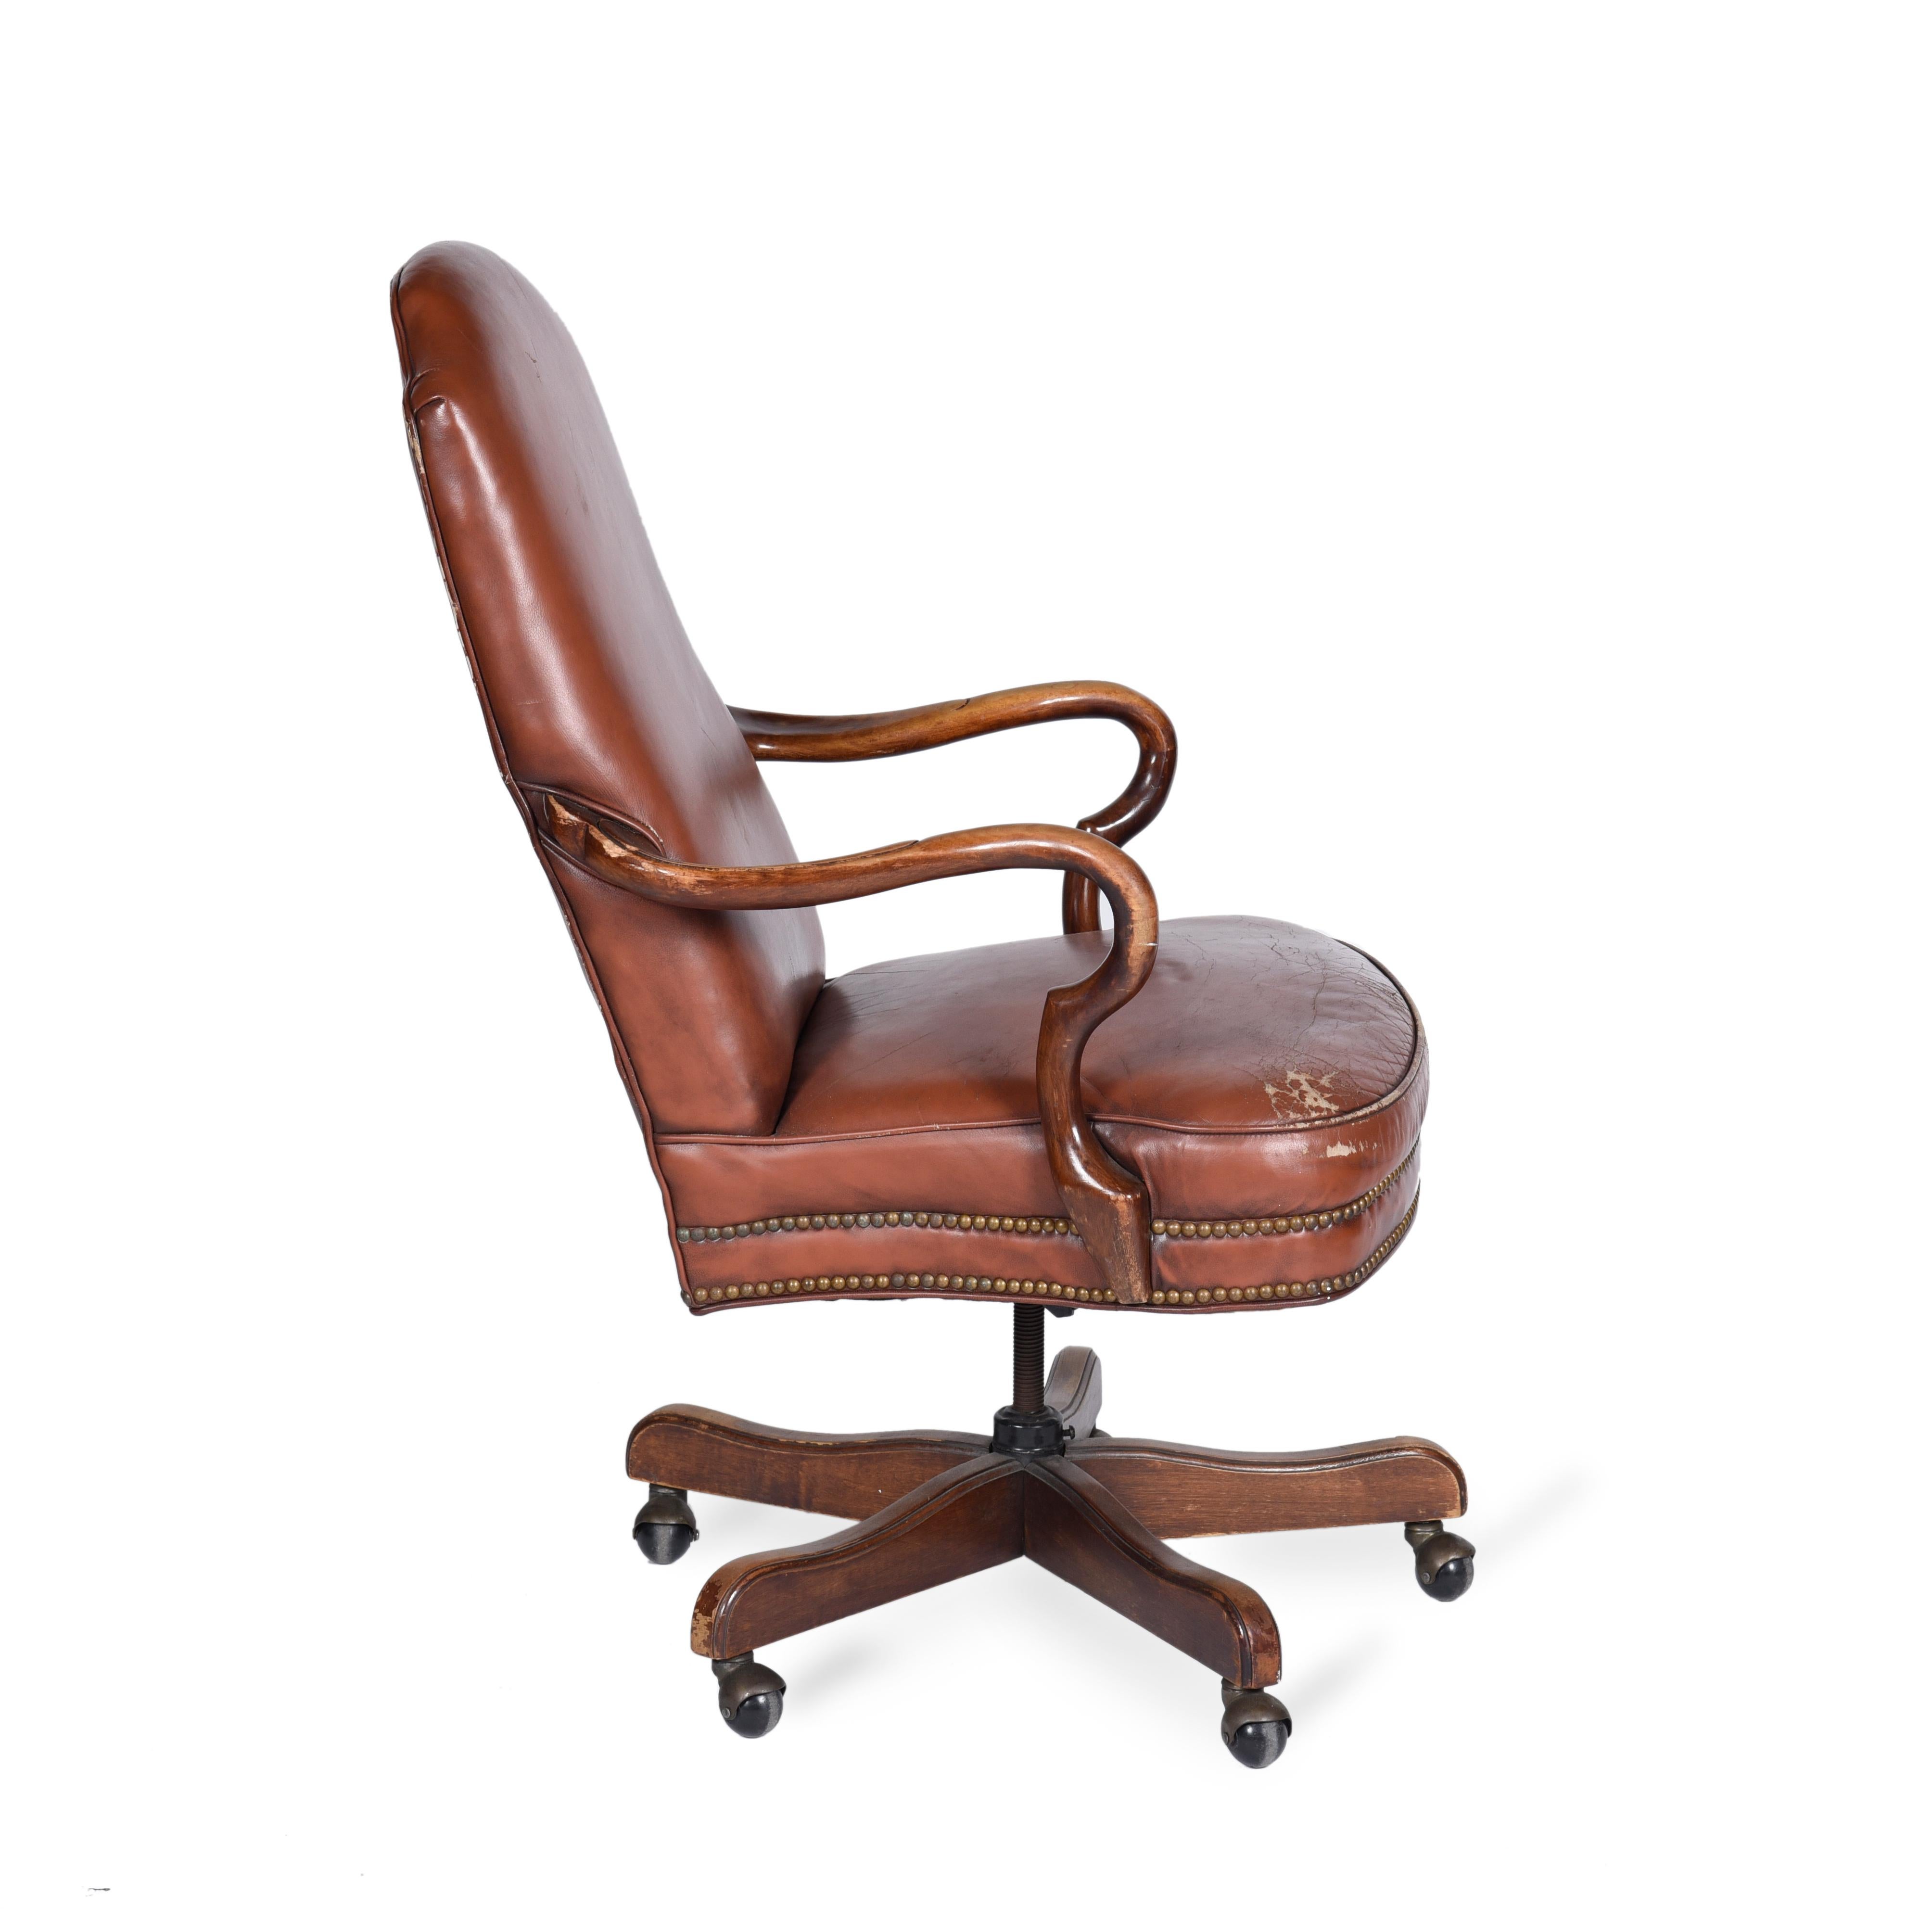 Neoclassical American rotating leather office chair by Woodmark.
  